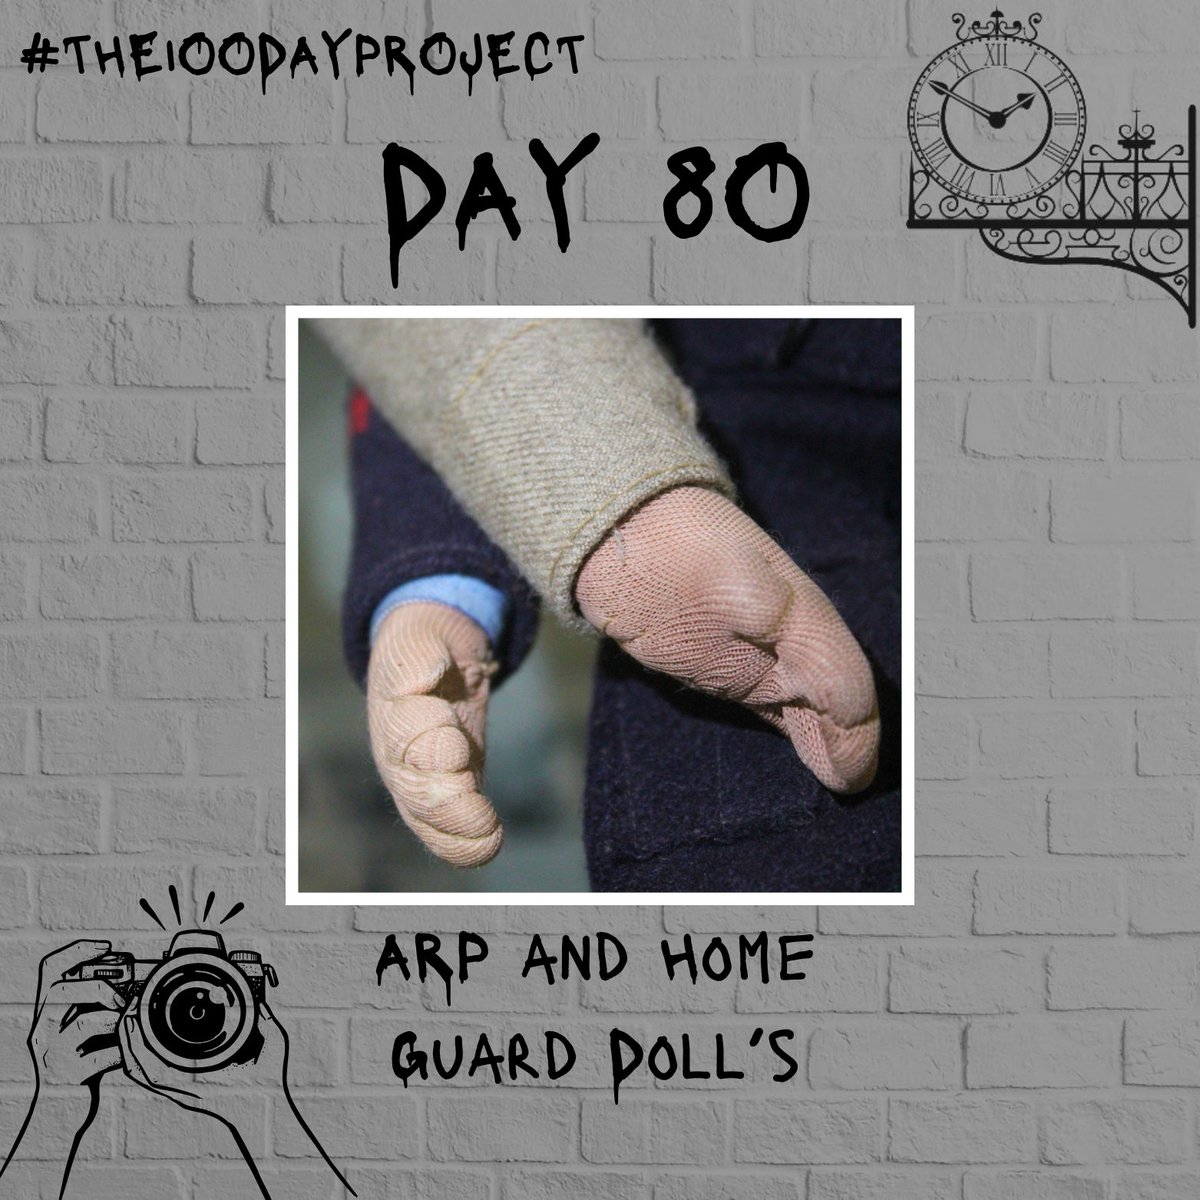 #Day80 of #The100DayProject2024 - ARP and Home Guard Dolls Head to our Facebook or Instagram for the full post #100daysatthemuseum #artinmuseums #richmond #richmonduponthames #getinspired #becreative #artist #photography #collage #newperpectives #colours #textures #lookclosely